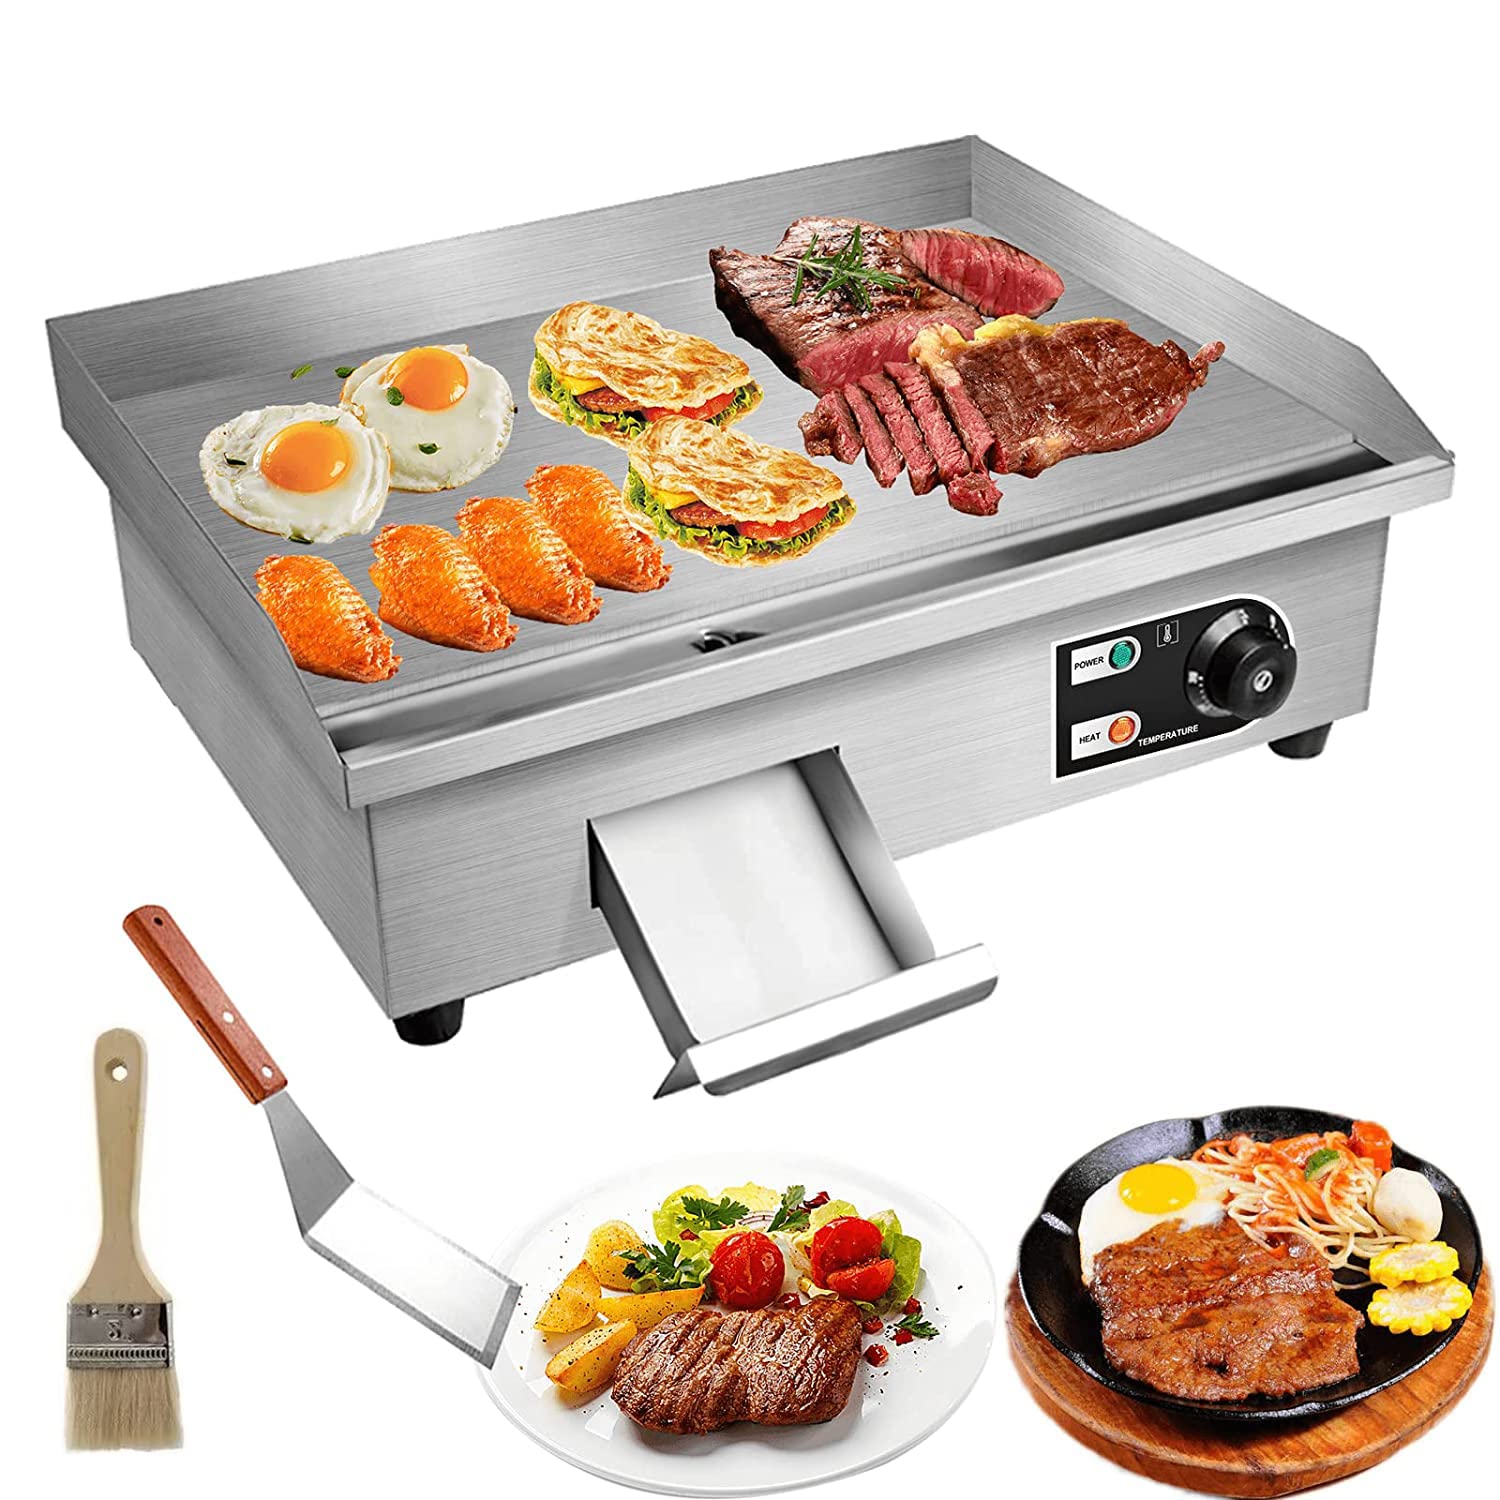 PROMOTOR 22 Electric countertop Flat Top griddle 3000W 110V Non-Stick commercial Restaurant Teppanyaki grill Stainless Steel Adj